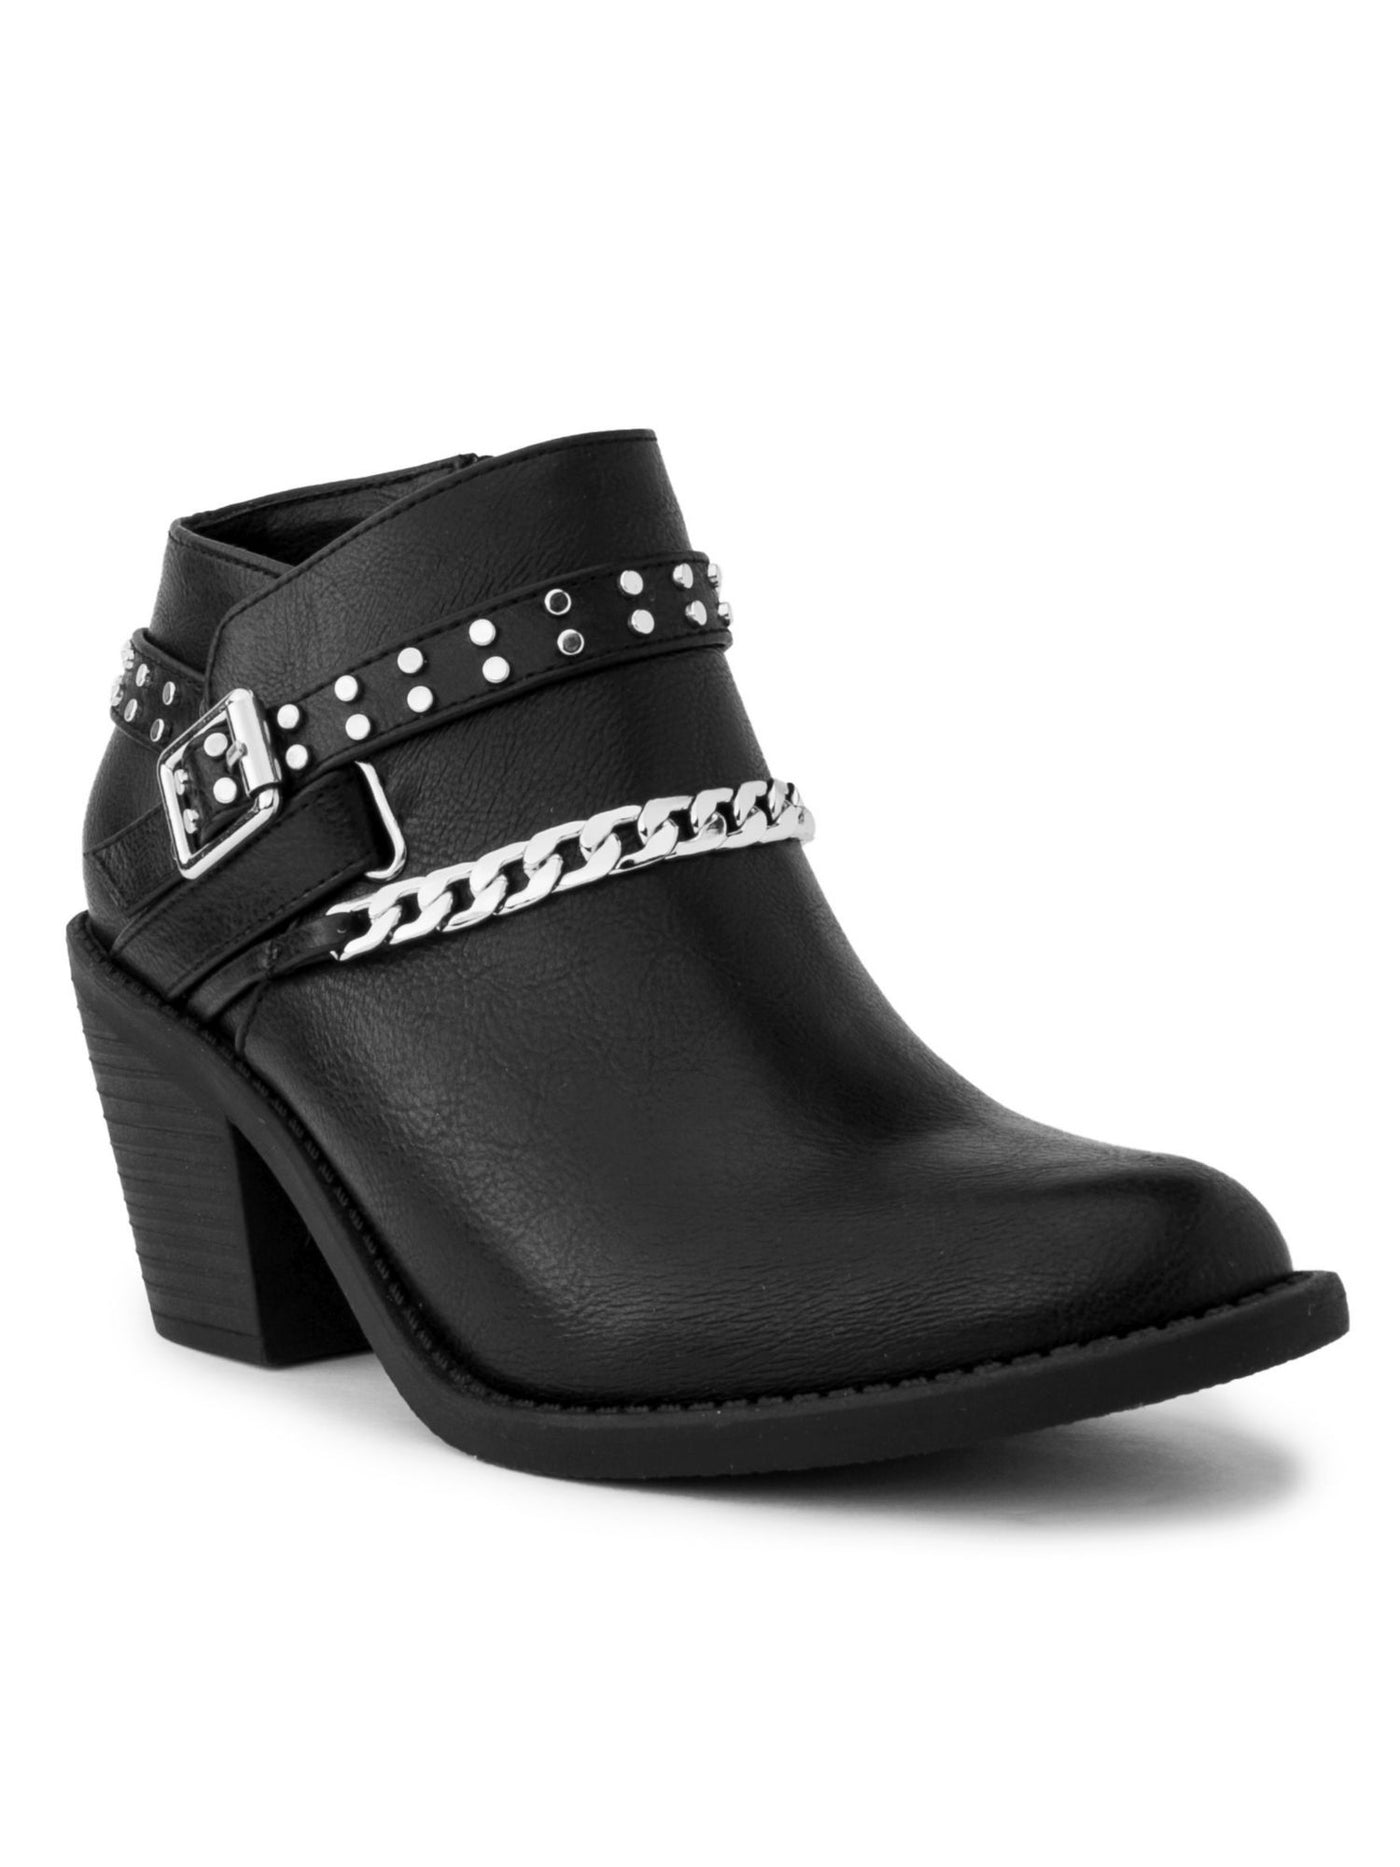 SUGAR Womens Black Chain And Strap Detailing Studded Buckle Accent Vroomy Almond Toe Block Heel Zip-Up Booties 7 M